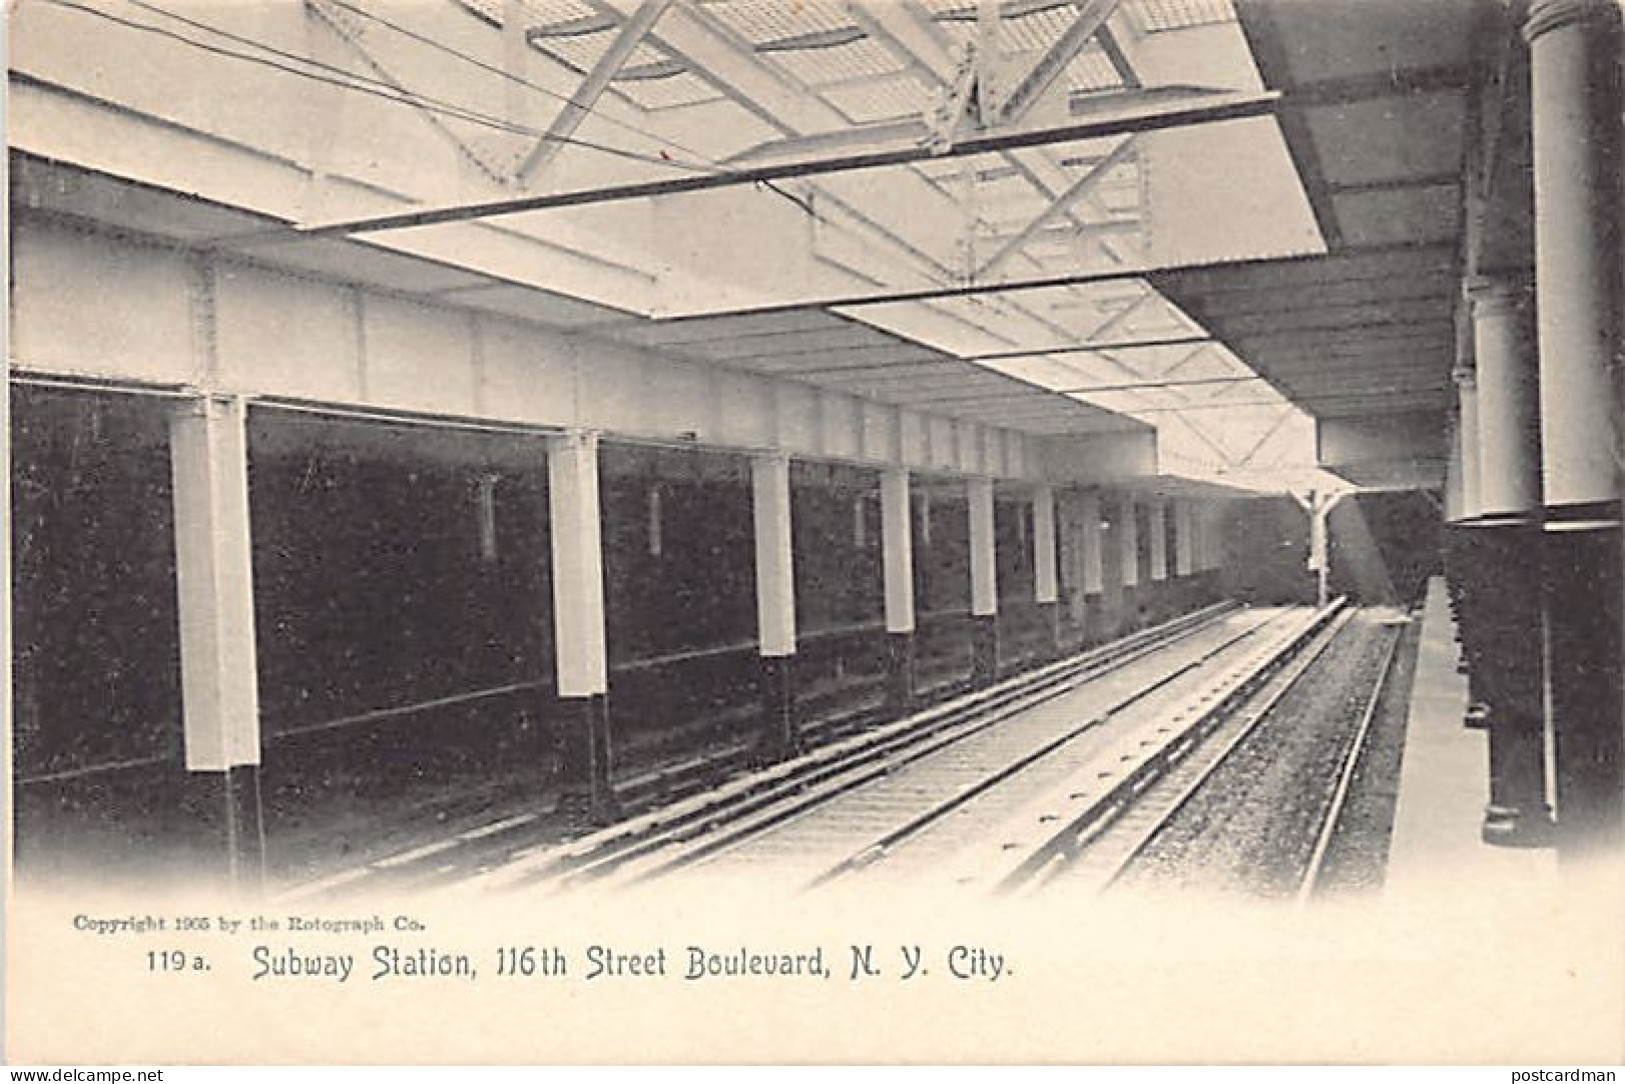 NEW YORK CITY Queens - Subway Station, 116th Street Boulevard - Publ. The Rotograph Co. 119 - Queens